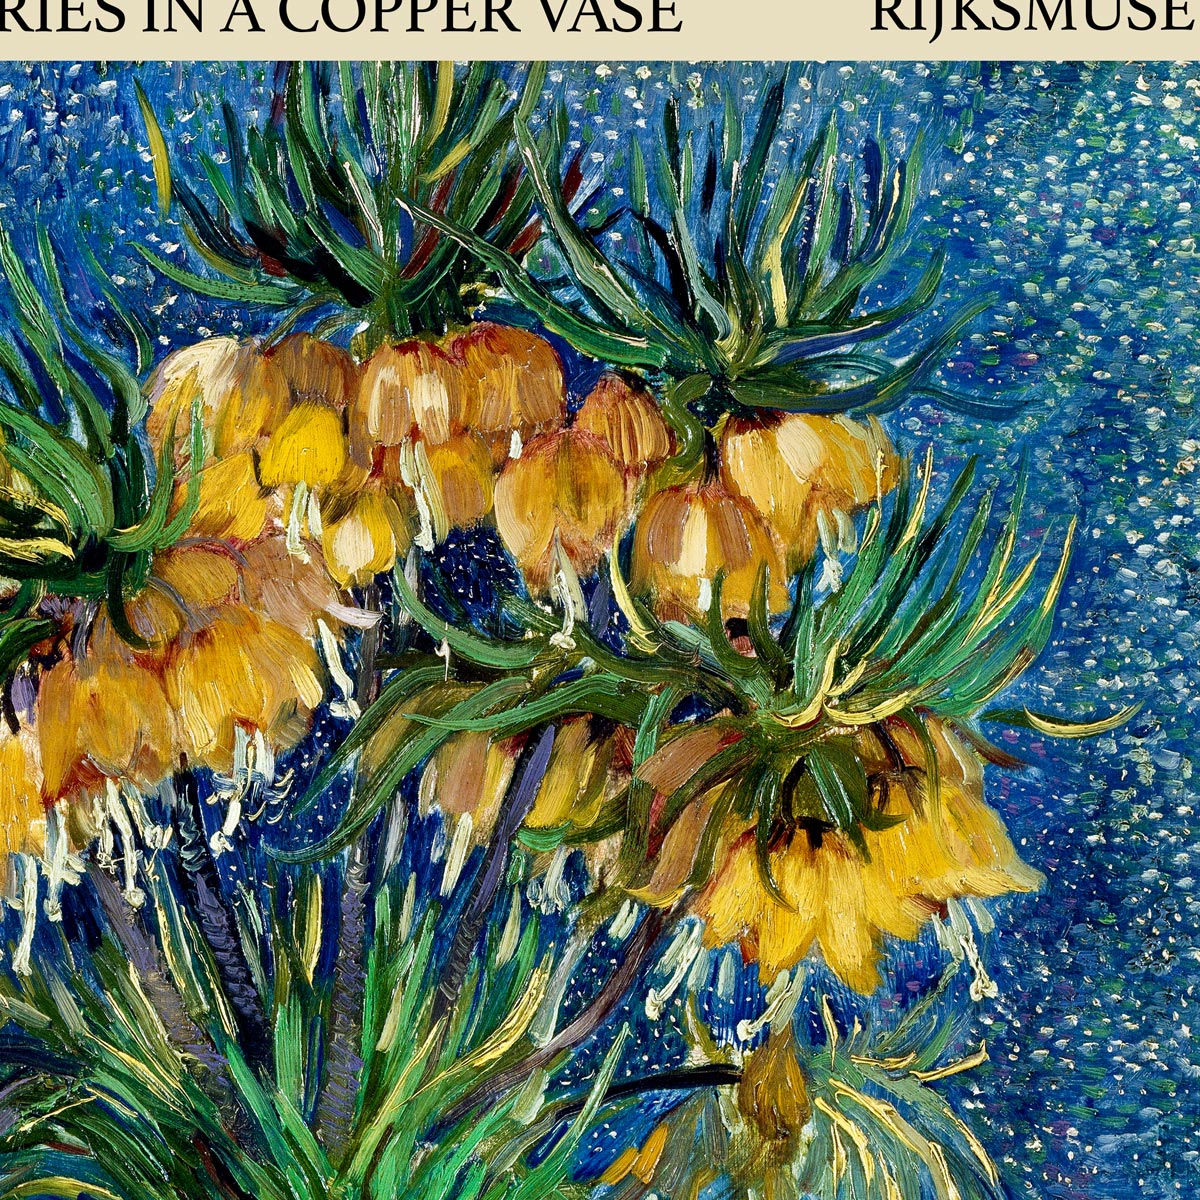 Imperial Fitillaries in a Copper Vase Art Exhibition Poster by Van Gogh